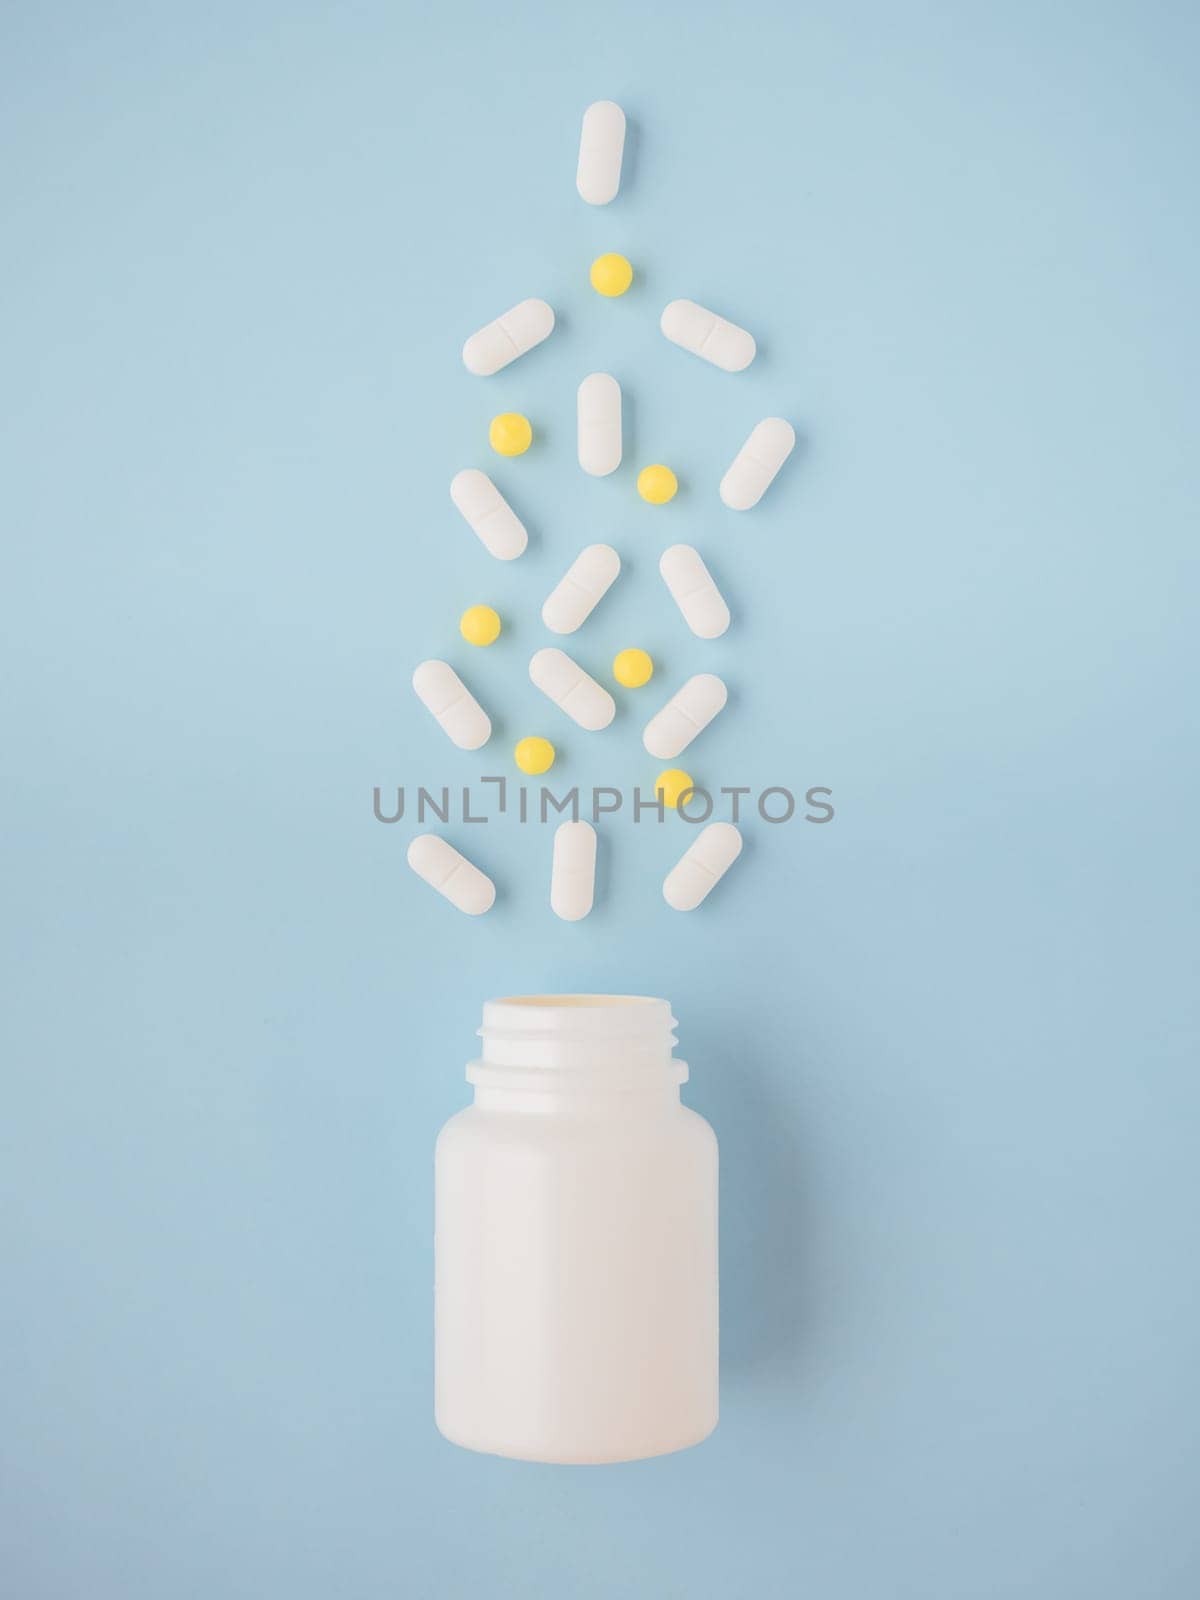 Modern medicine for preventing and treat diseases. White medicine bottle, yellow and white pills on blue paper background. Vertical top view, copy space. Concept of healthcare and treatment of viruses